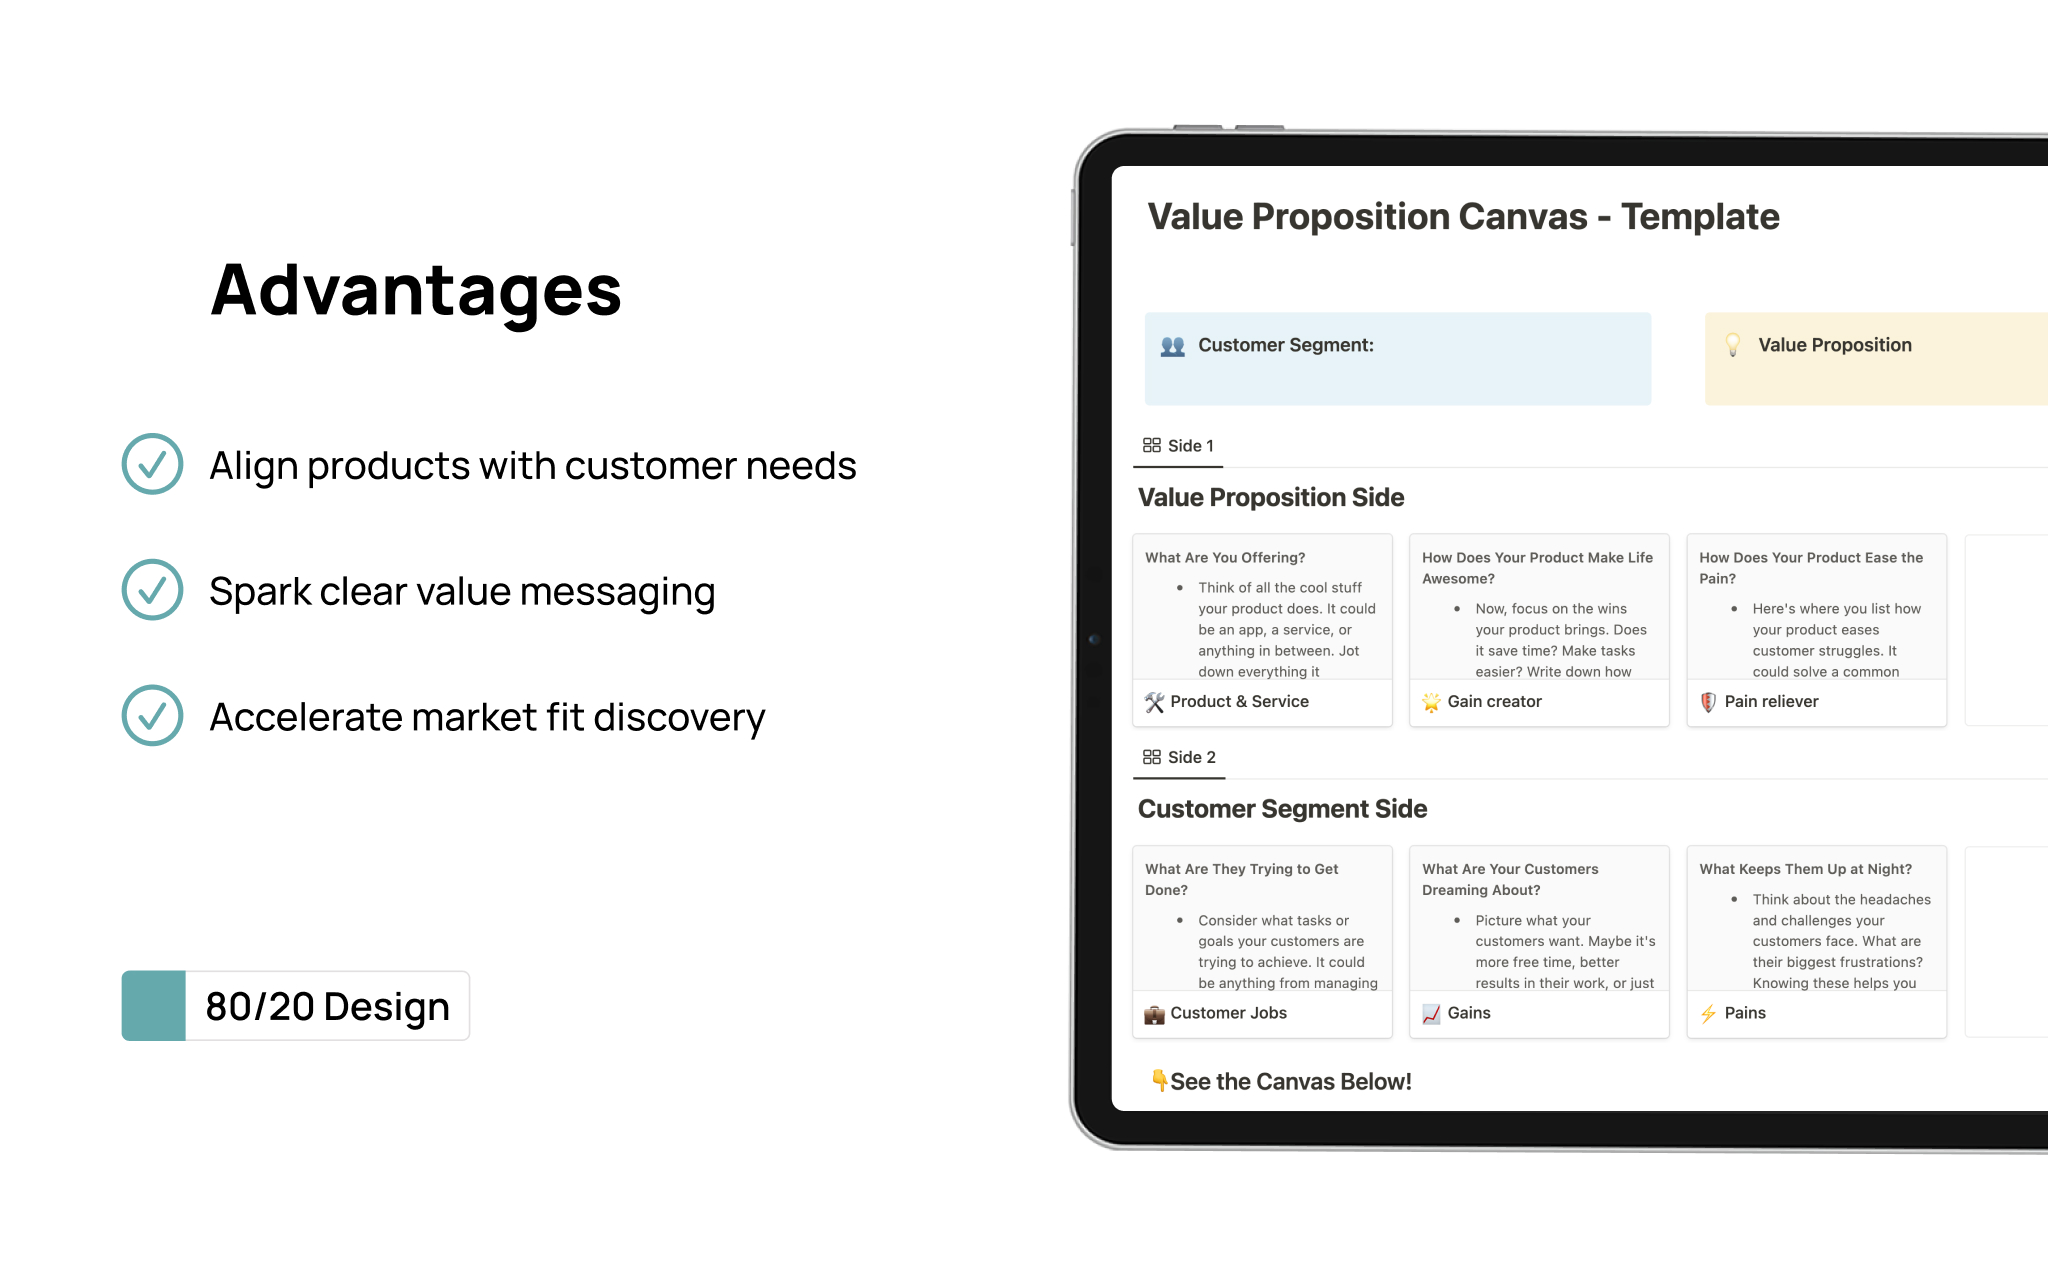 Craft your value clearly with the '🖼️ Value Proposition Canvas' from 80/20 Design. Perfect for solopreneurs and startups, it helps align your offerings with customer needs 🎯.
Dive into www.8020d.com for more tools and guides 🚀.